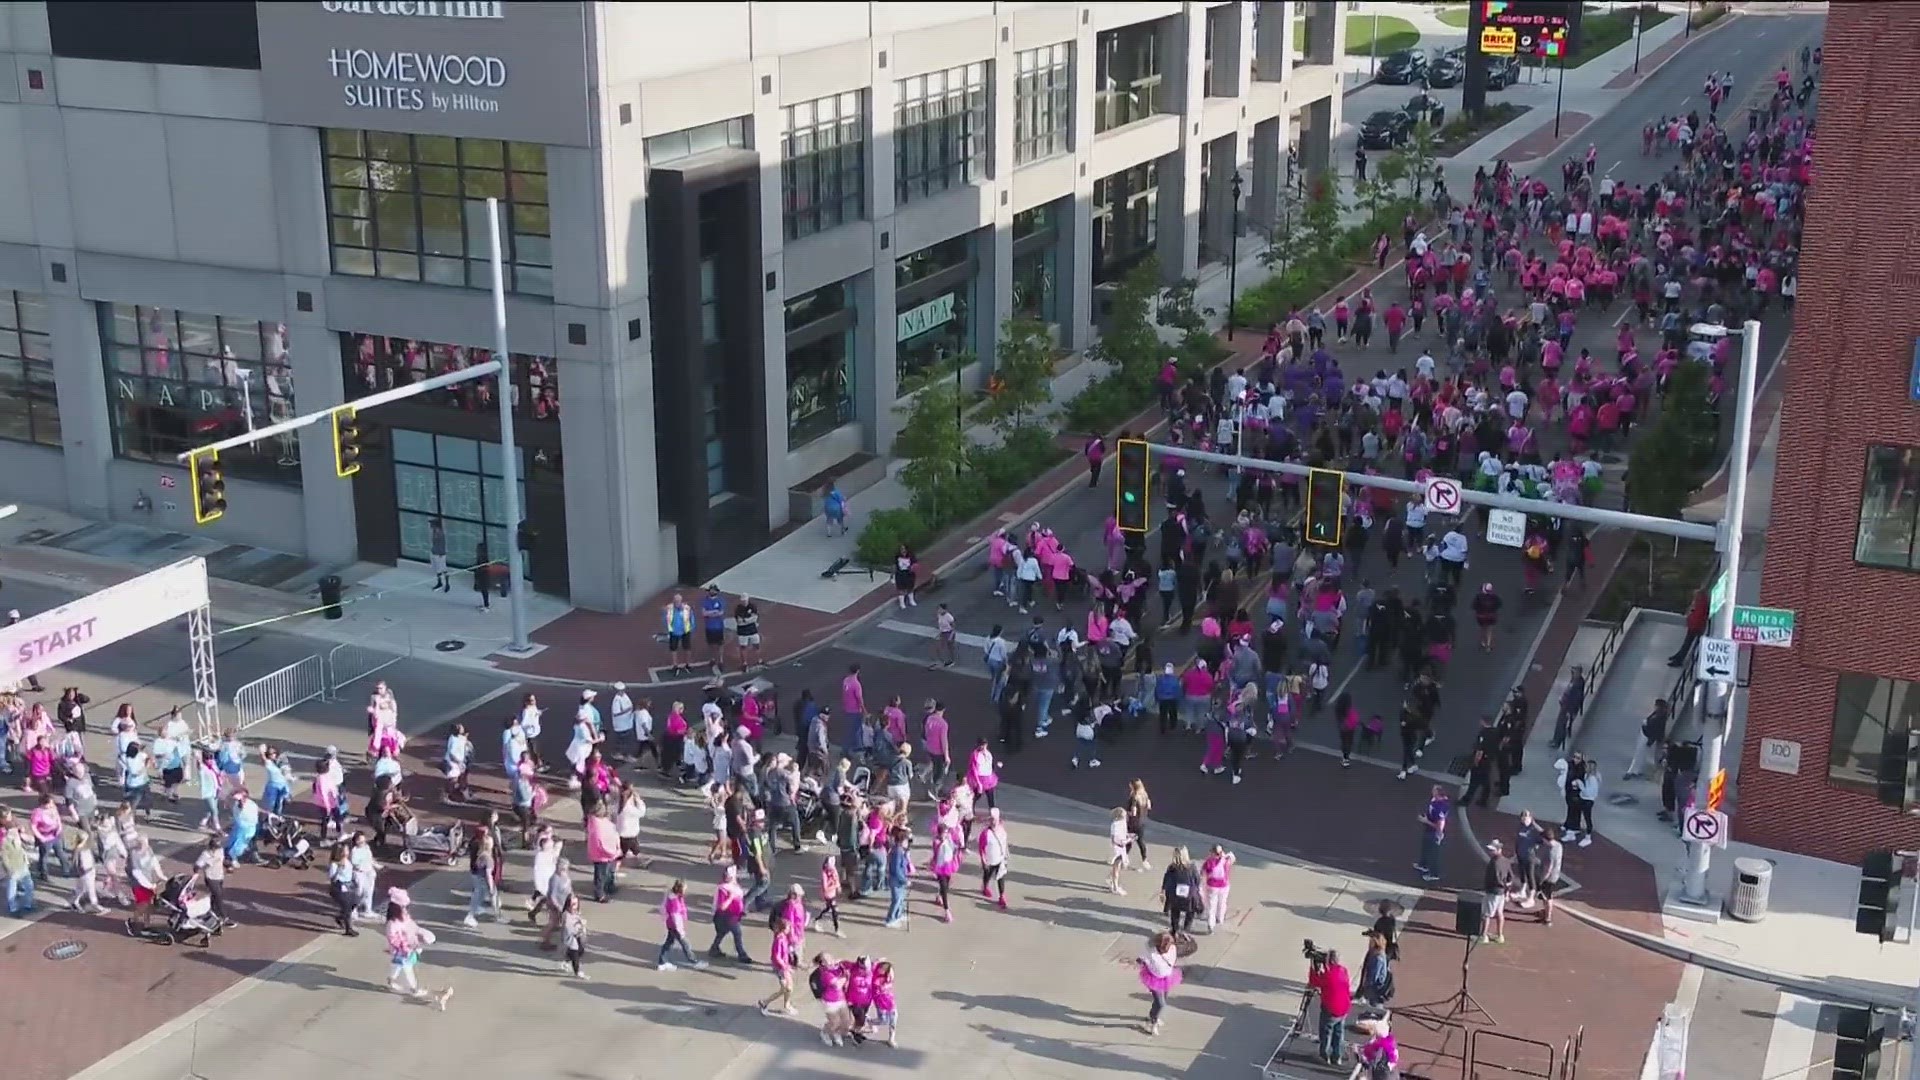 The Susan G. Komen Northwest Ohio Race for the Cure 2023 on Saturday saw a large turnout. $1.1 billion has been invested in research to find a cure.